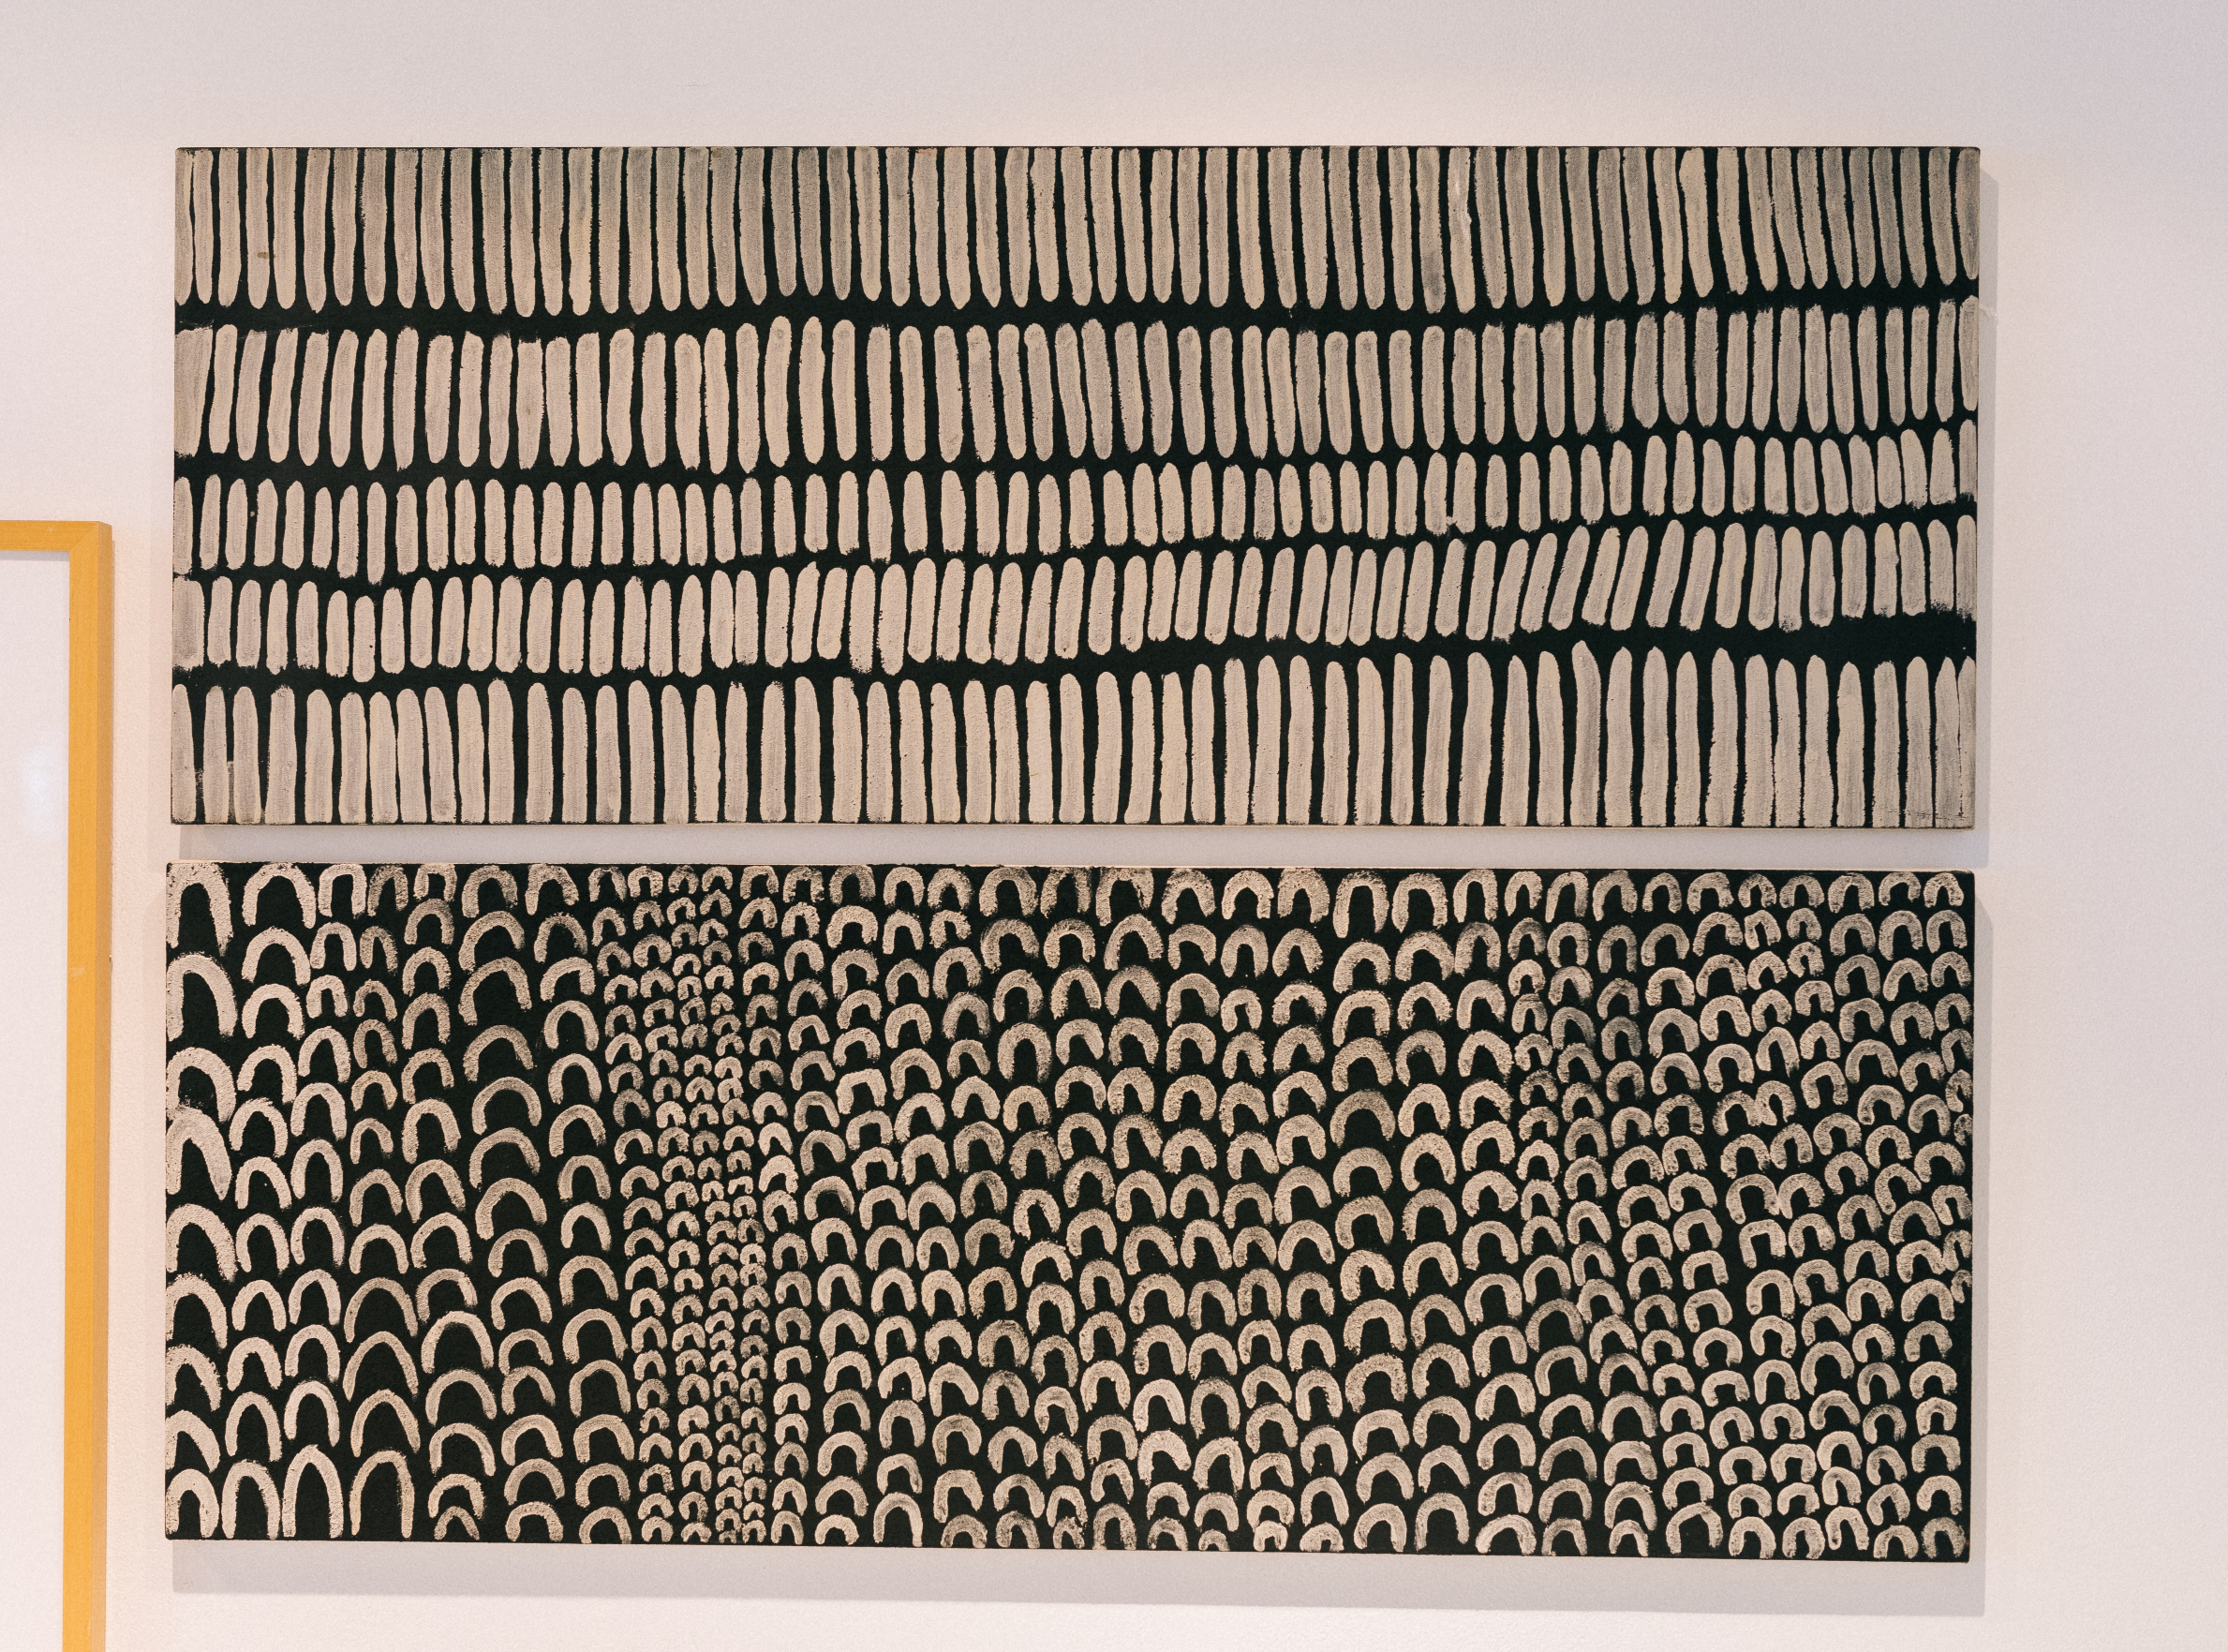 Two black and white paintings with a horizontal orientation. One work depicts many vertical lines in five rows, the other painting features repeated horseshoe shapes.